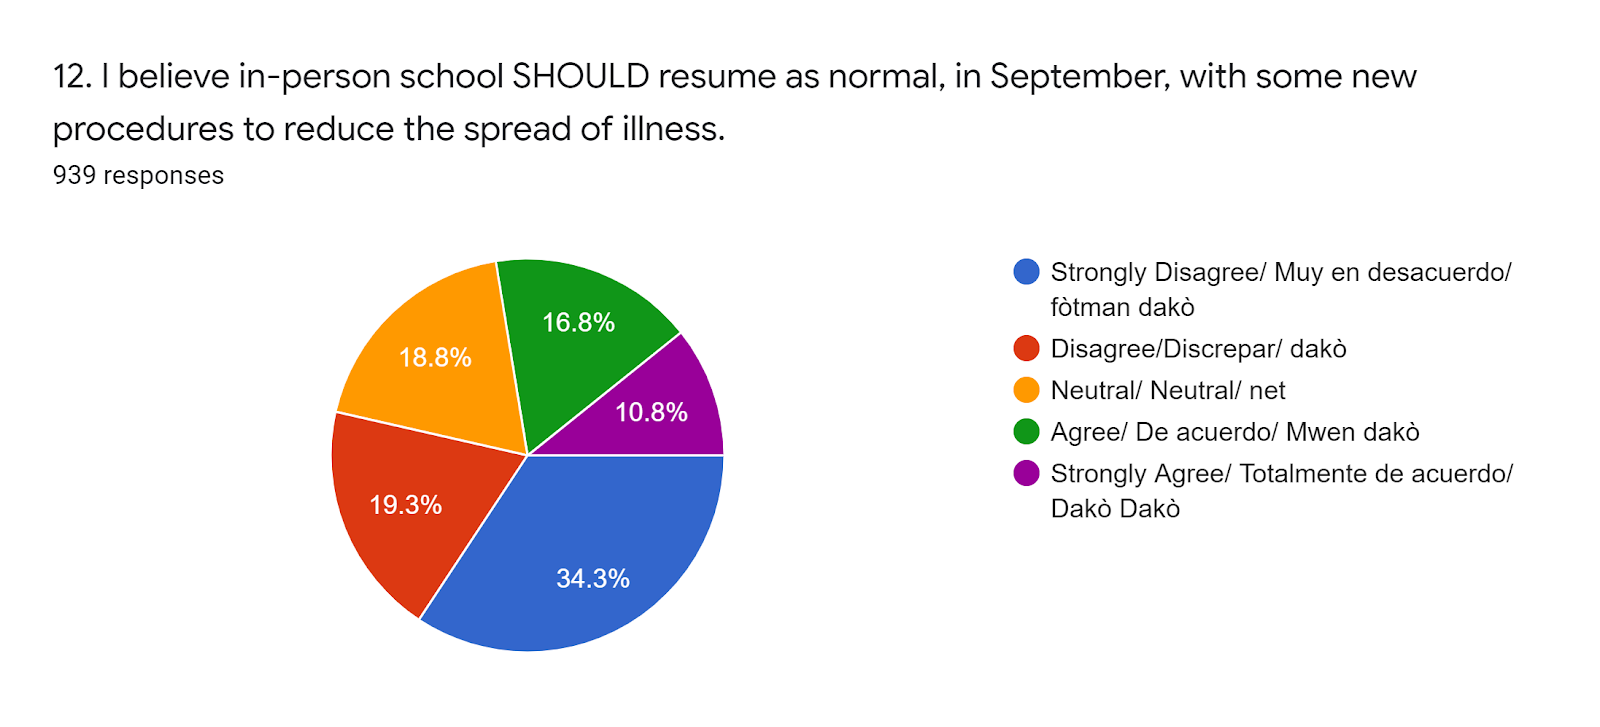 Forms response chart. Question title: 12. I believe in-person school SHOULD resume as normal, in September, with some new procedures to reduce the spread of illness.. Number of responses: 939 responses.